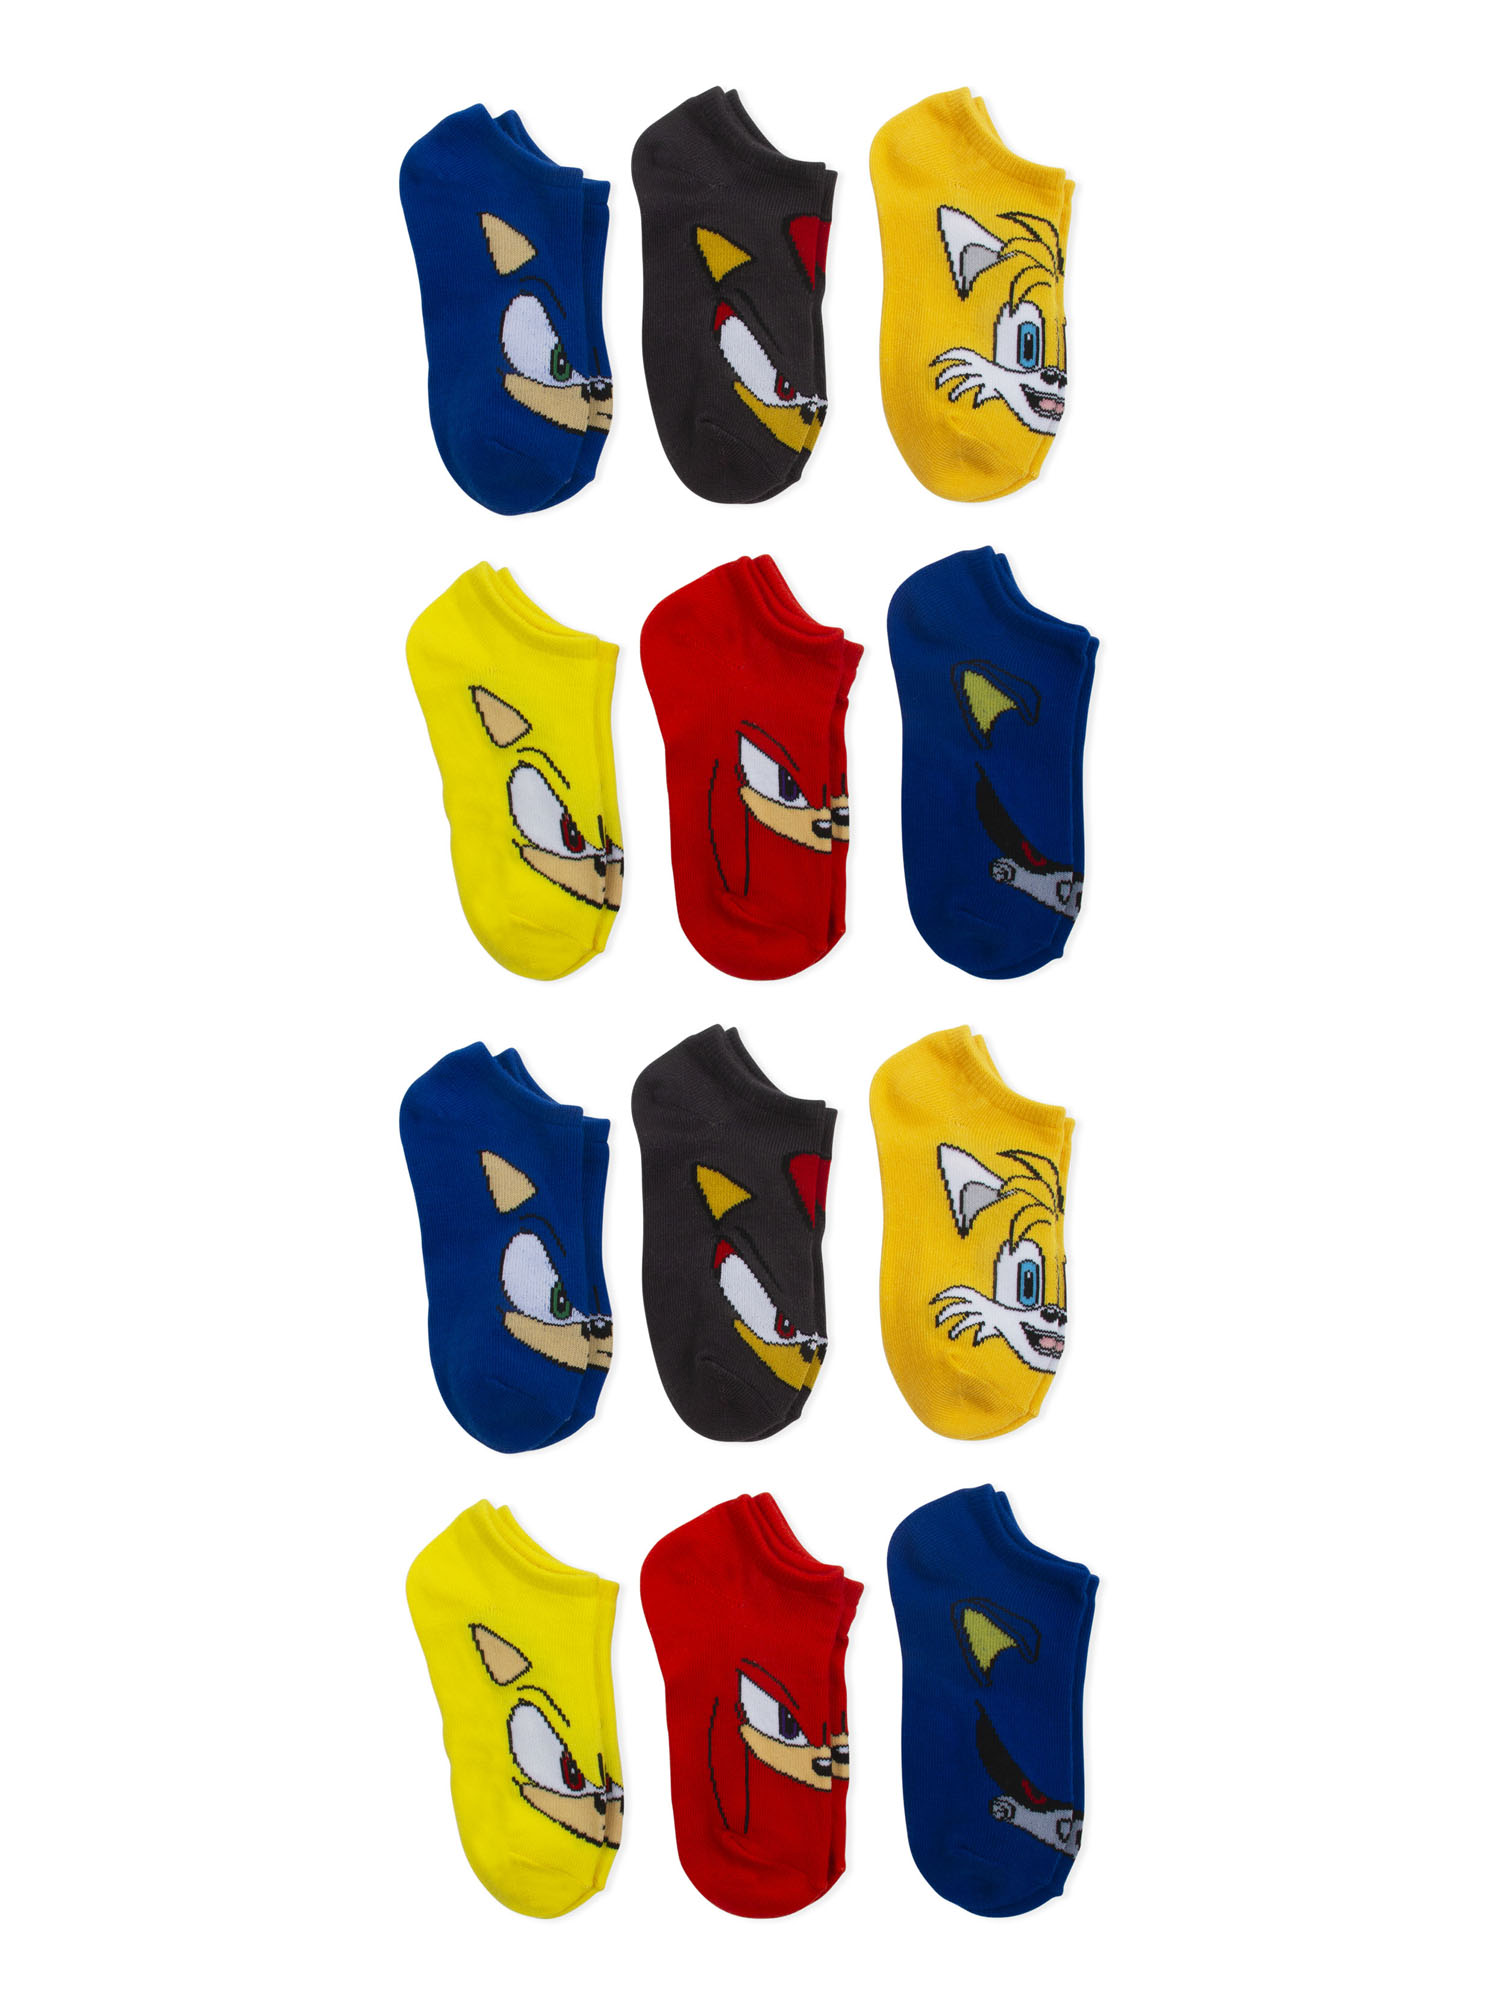 Sonic the Hedgehog Boys Socks, 12 Pack No Shows Sizes S (4.5-8.5) - L (3-9) - image 1 of 2